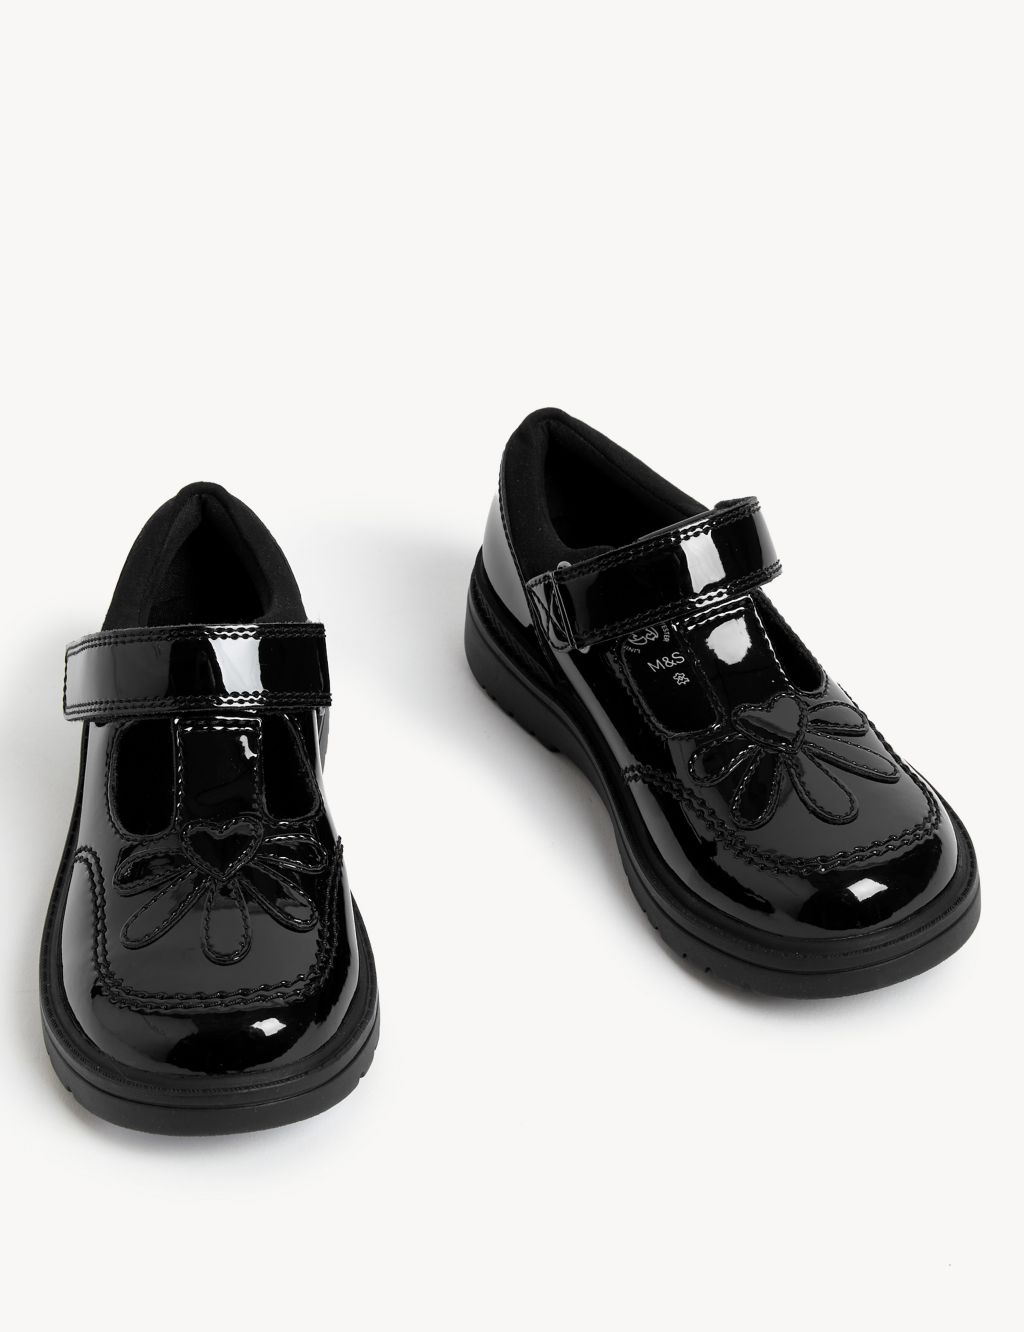 Kids' Patent Leather School Shoes (8 Small - 2 Large) | M&S Collection ...